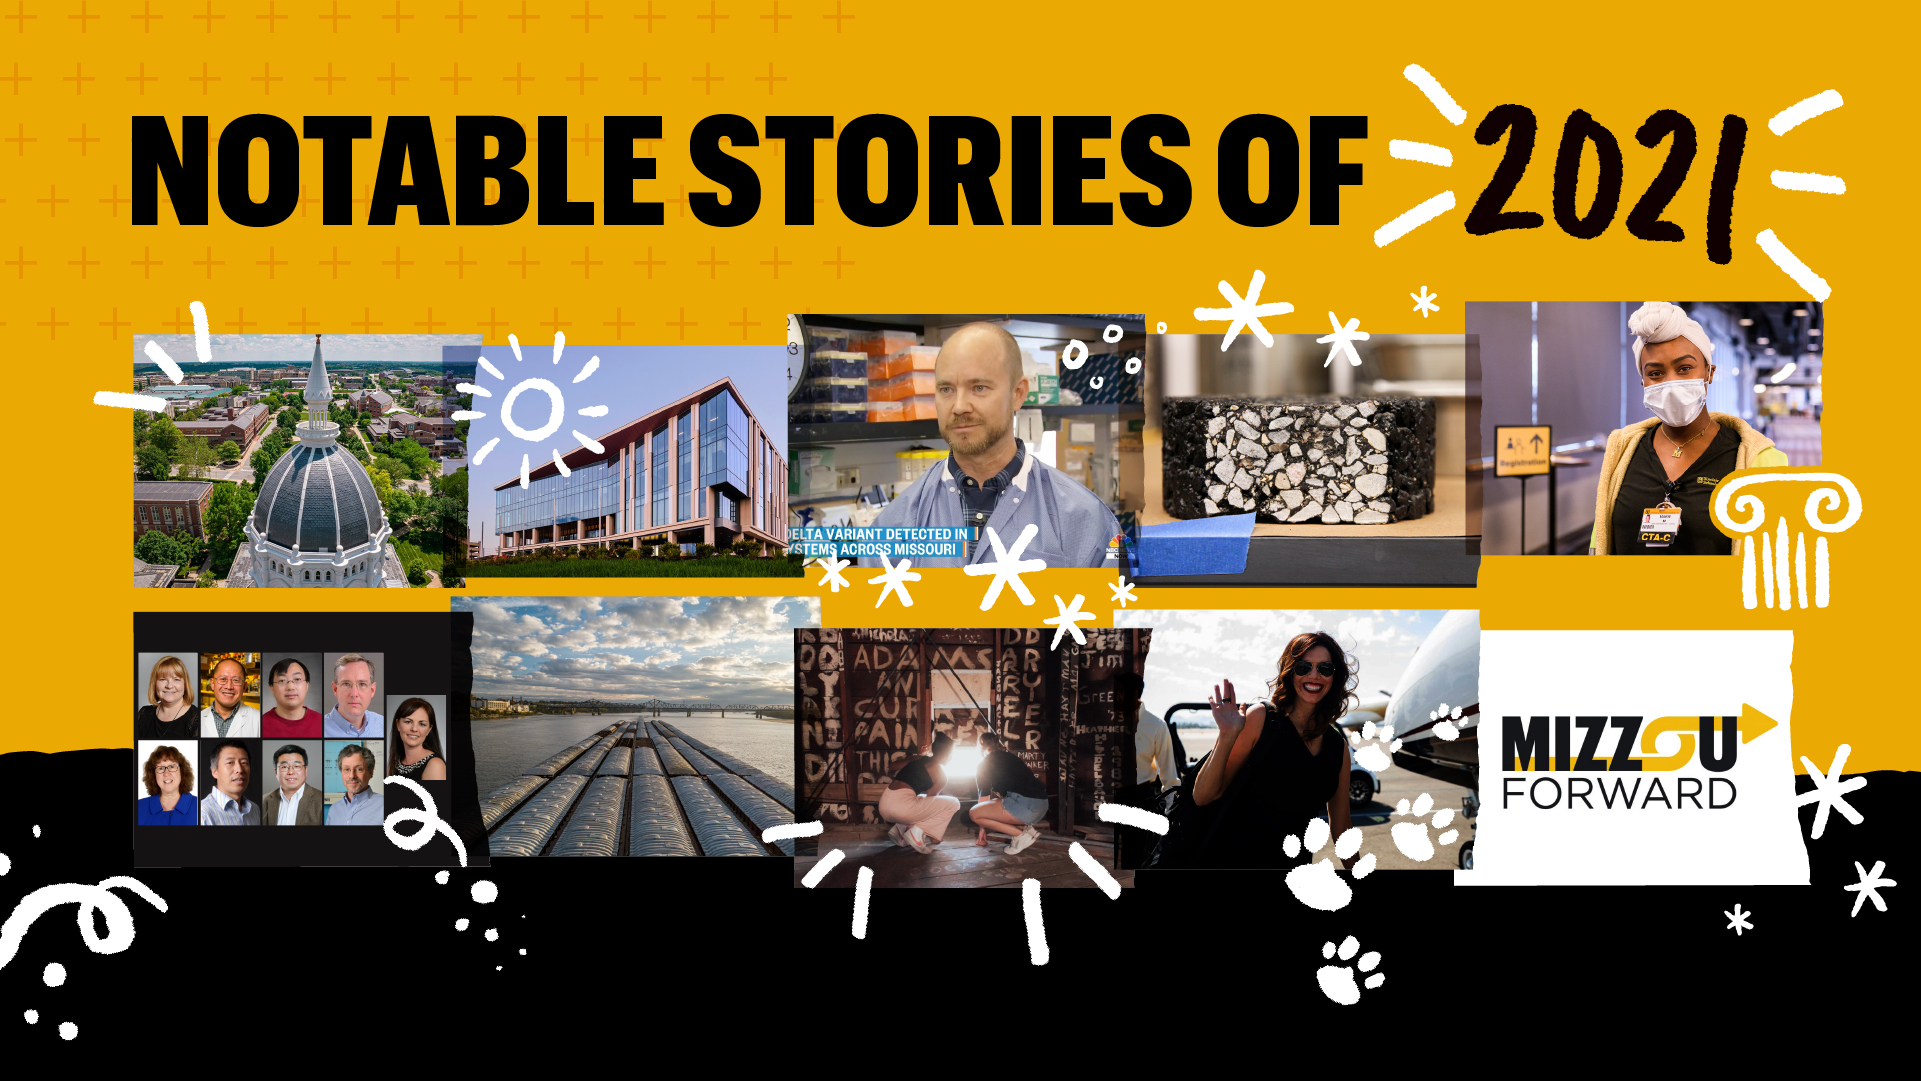 graphic that says "notable stories of 2021" and has a collage of photos on it